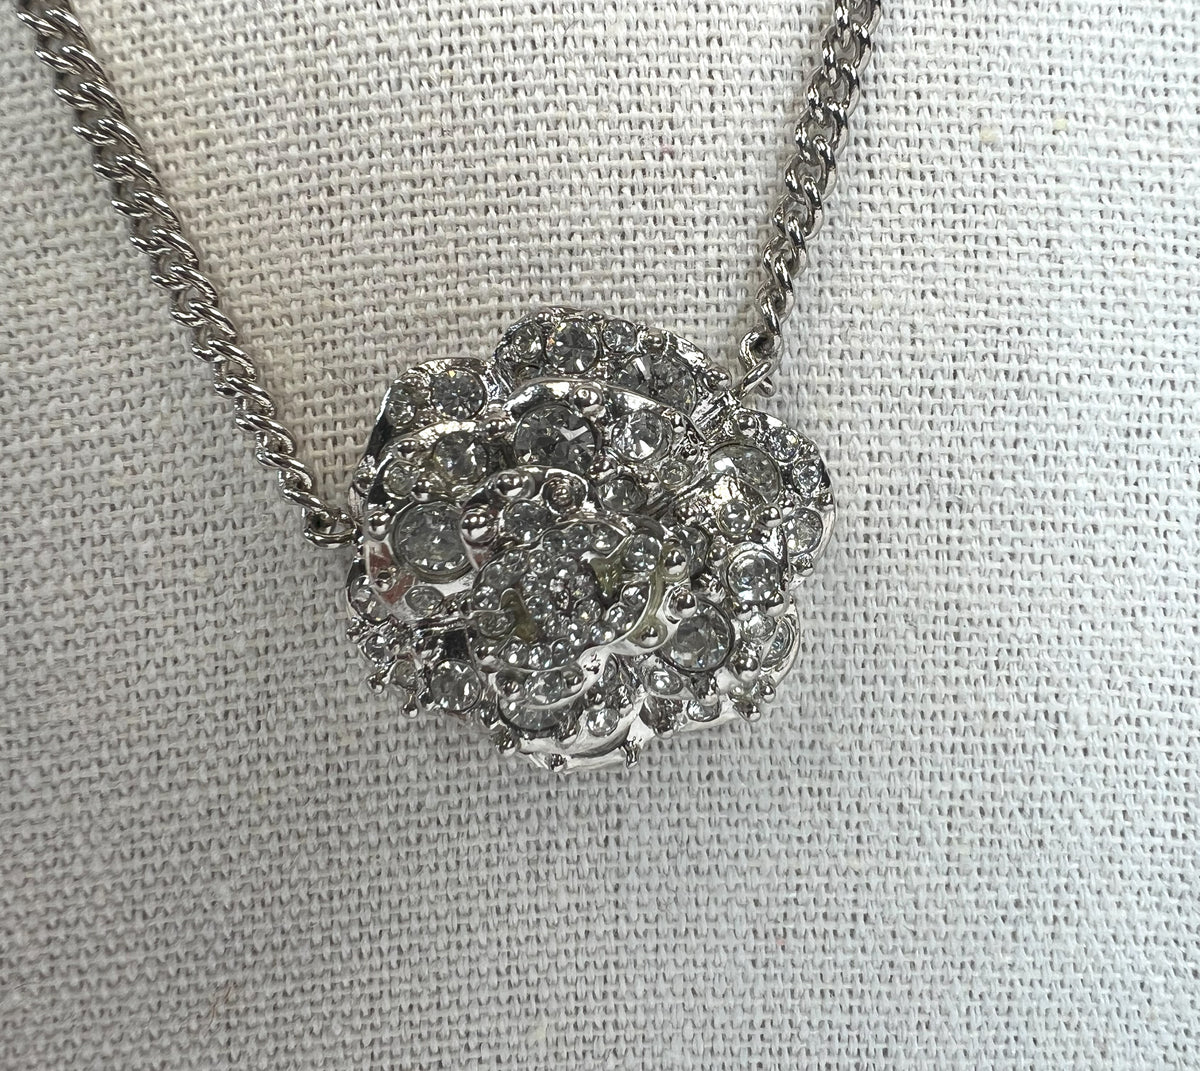 Excellent Pre-Loved Silver Tone Crystal Embellished 3-Tier Camellia Pendant Necklace. (close up)